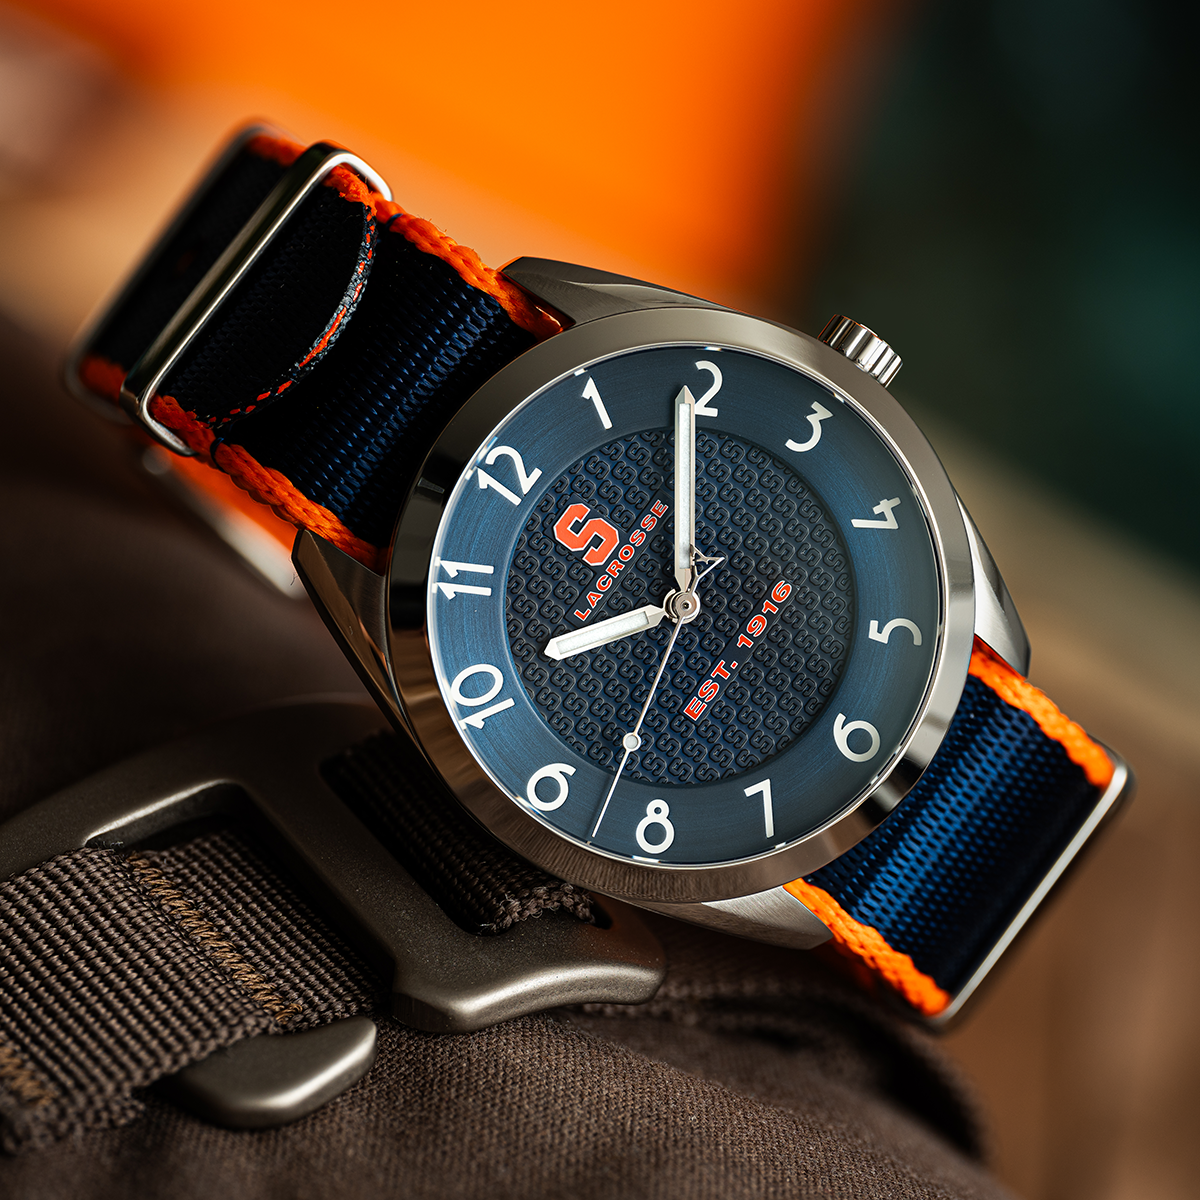 Syracuse lacrosse Swiss made automatic watch. Table view with color-matched NATO strap.